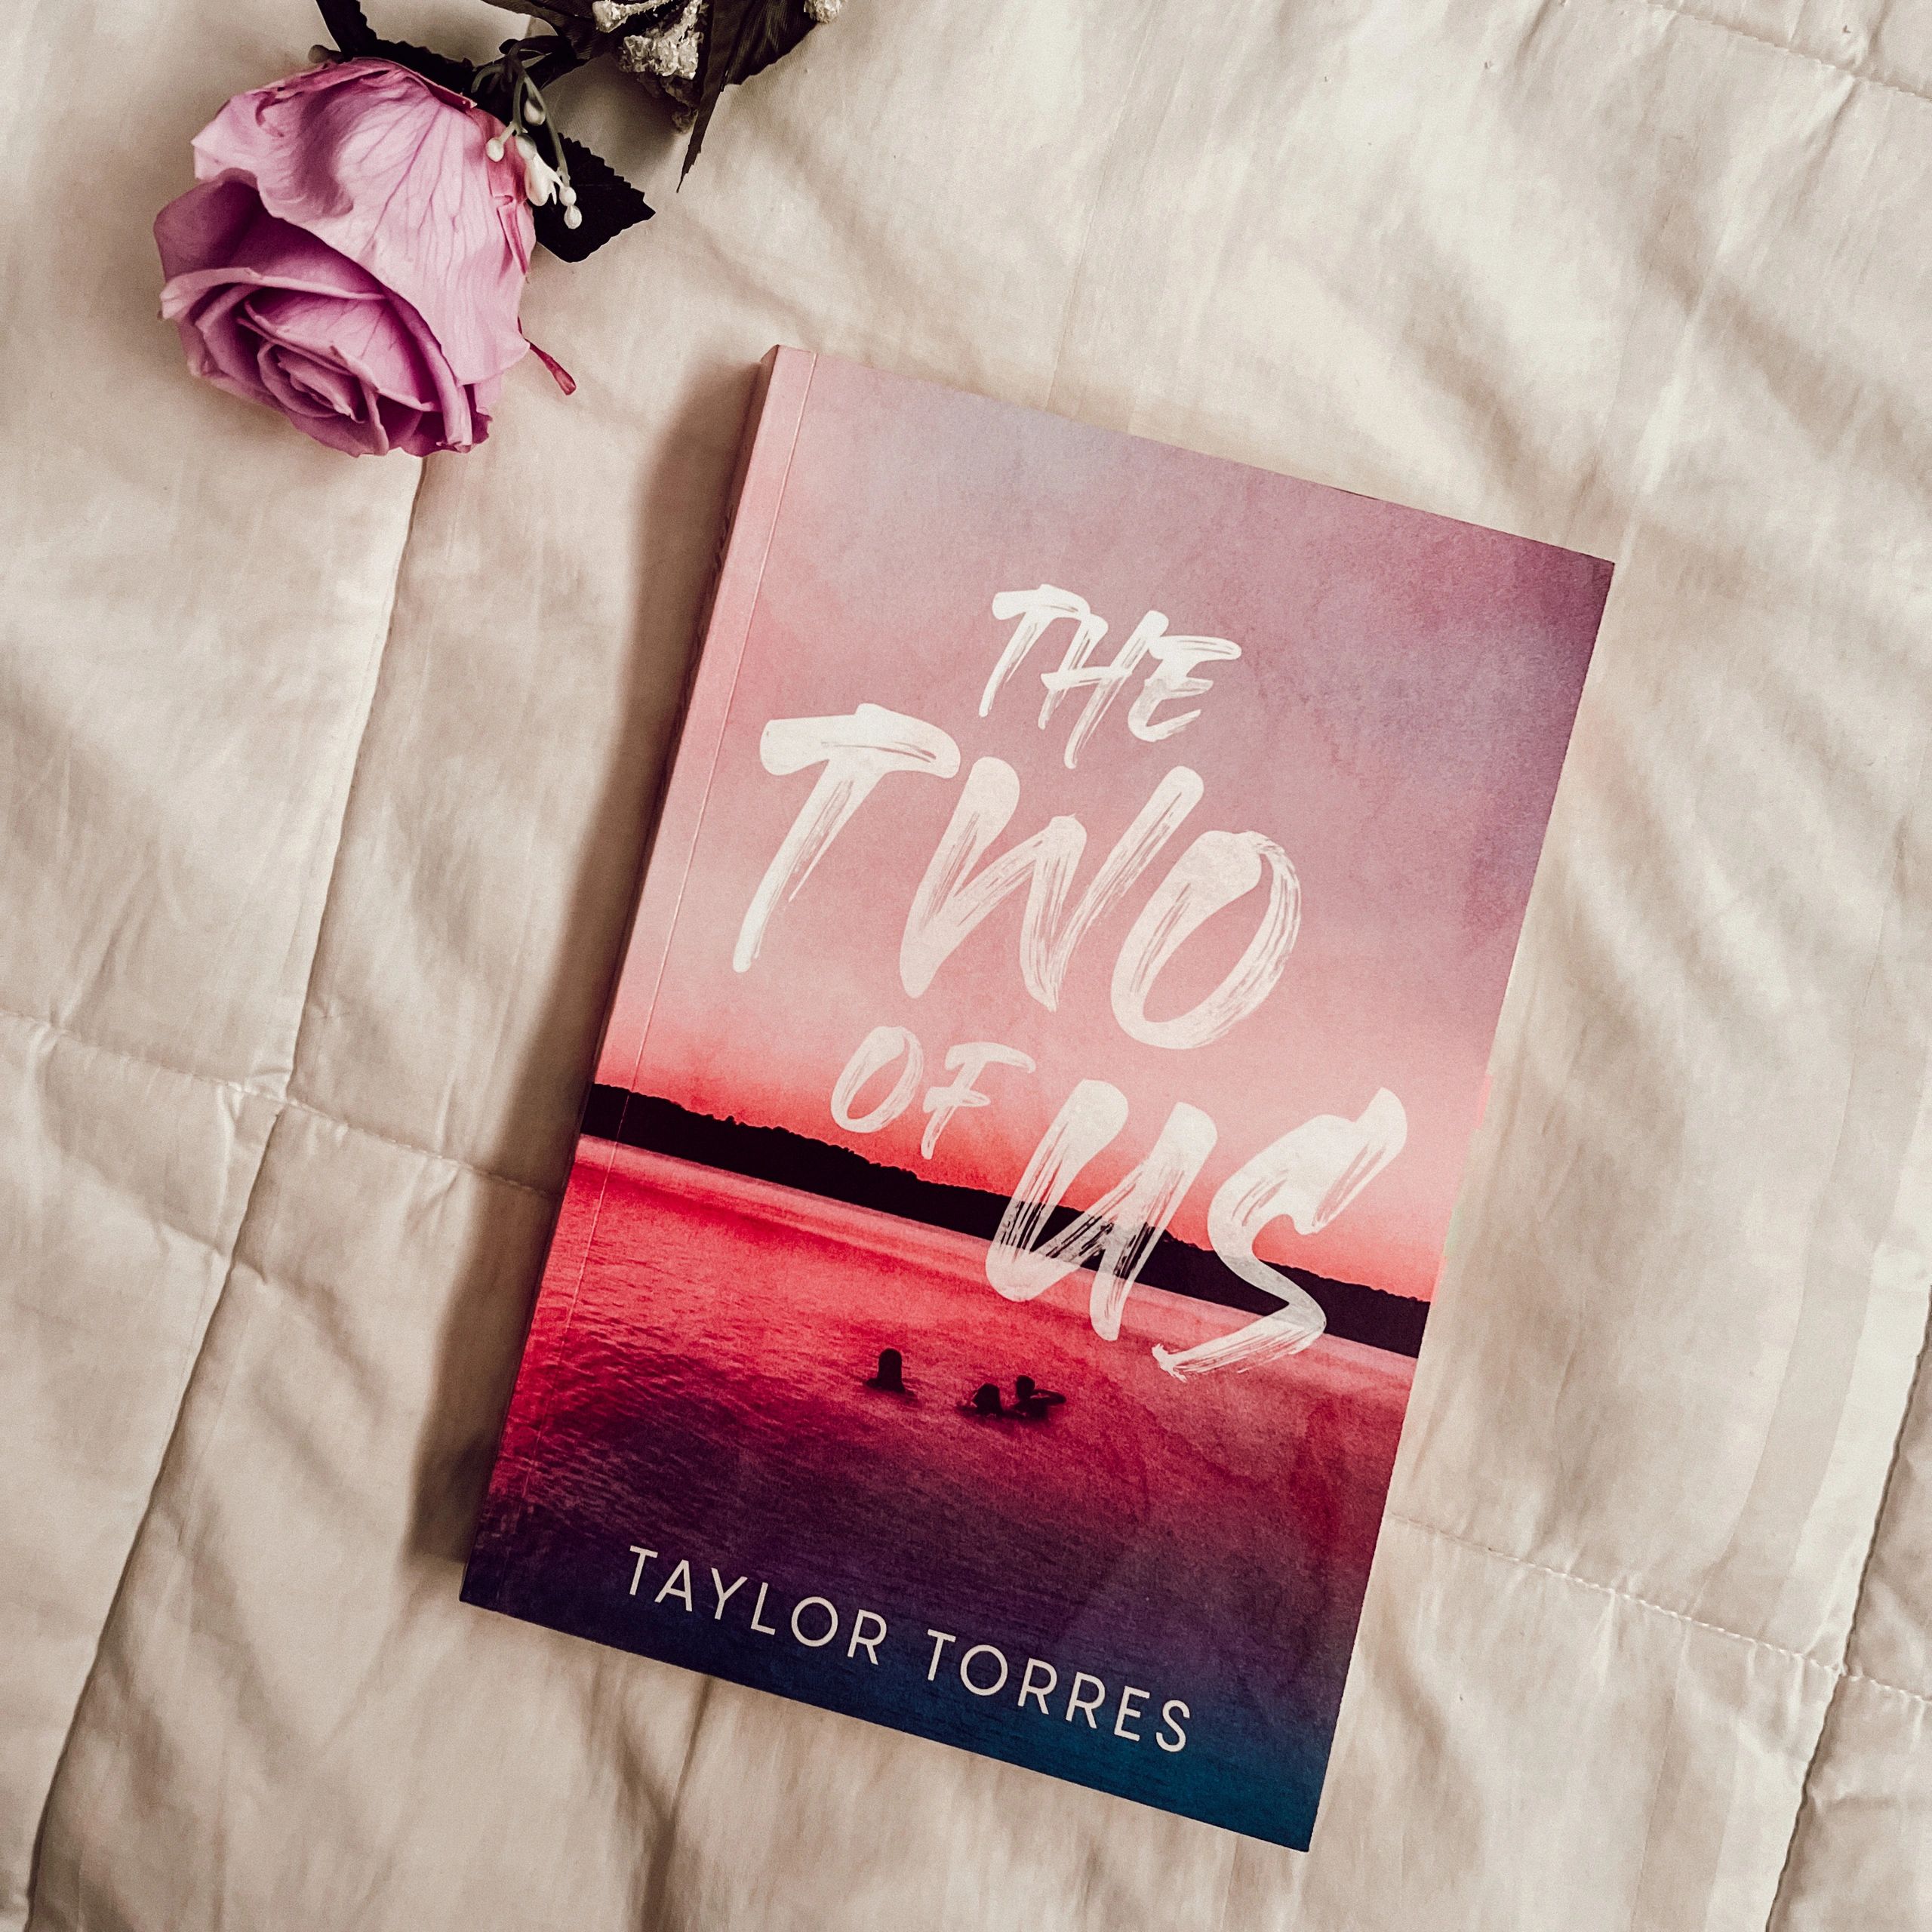 The Two of Us by Taylor Torres